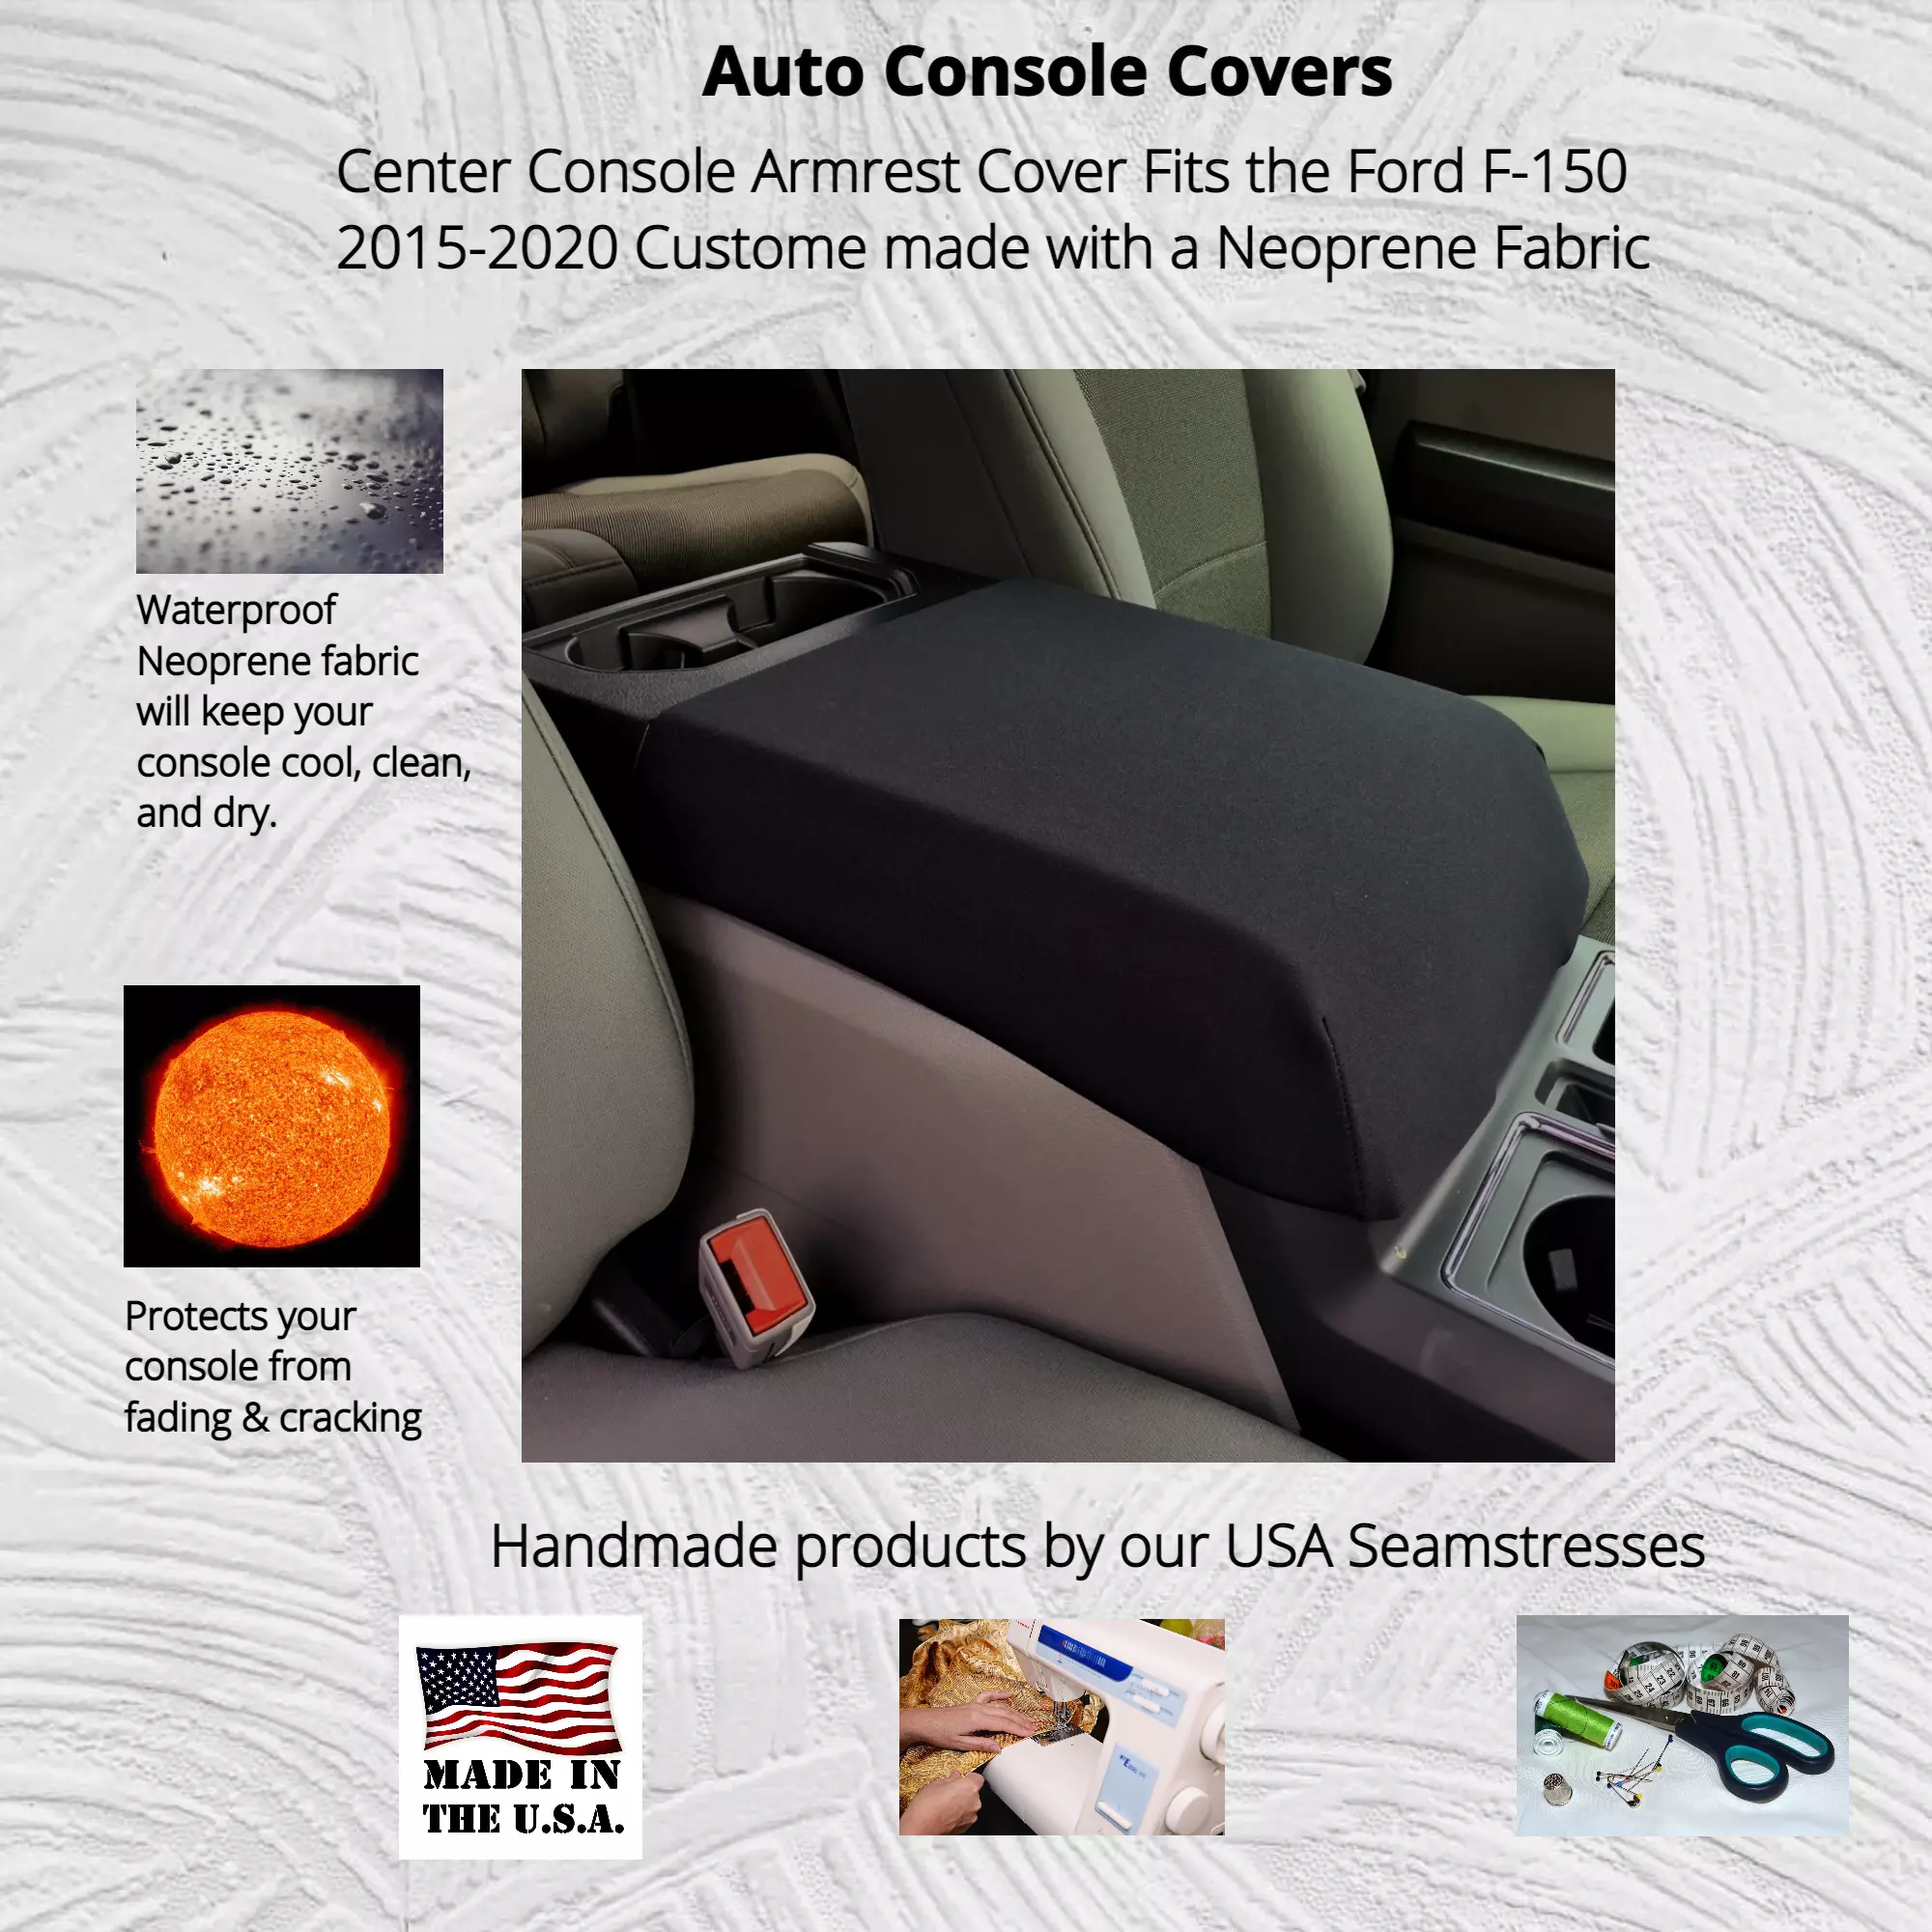 Gray Fits The Ford F-150 2015-2021 Center Console Armrest Cover Waterproof Neoprene Fabric Auto Console Covers